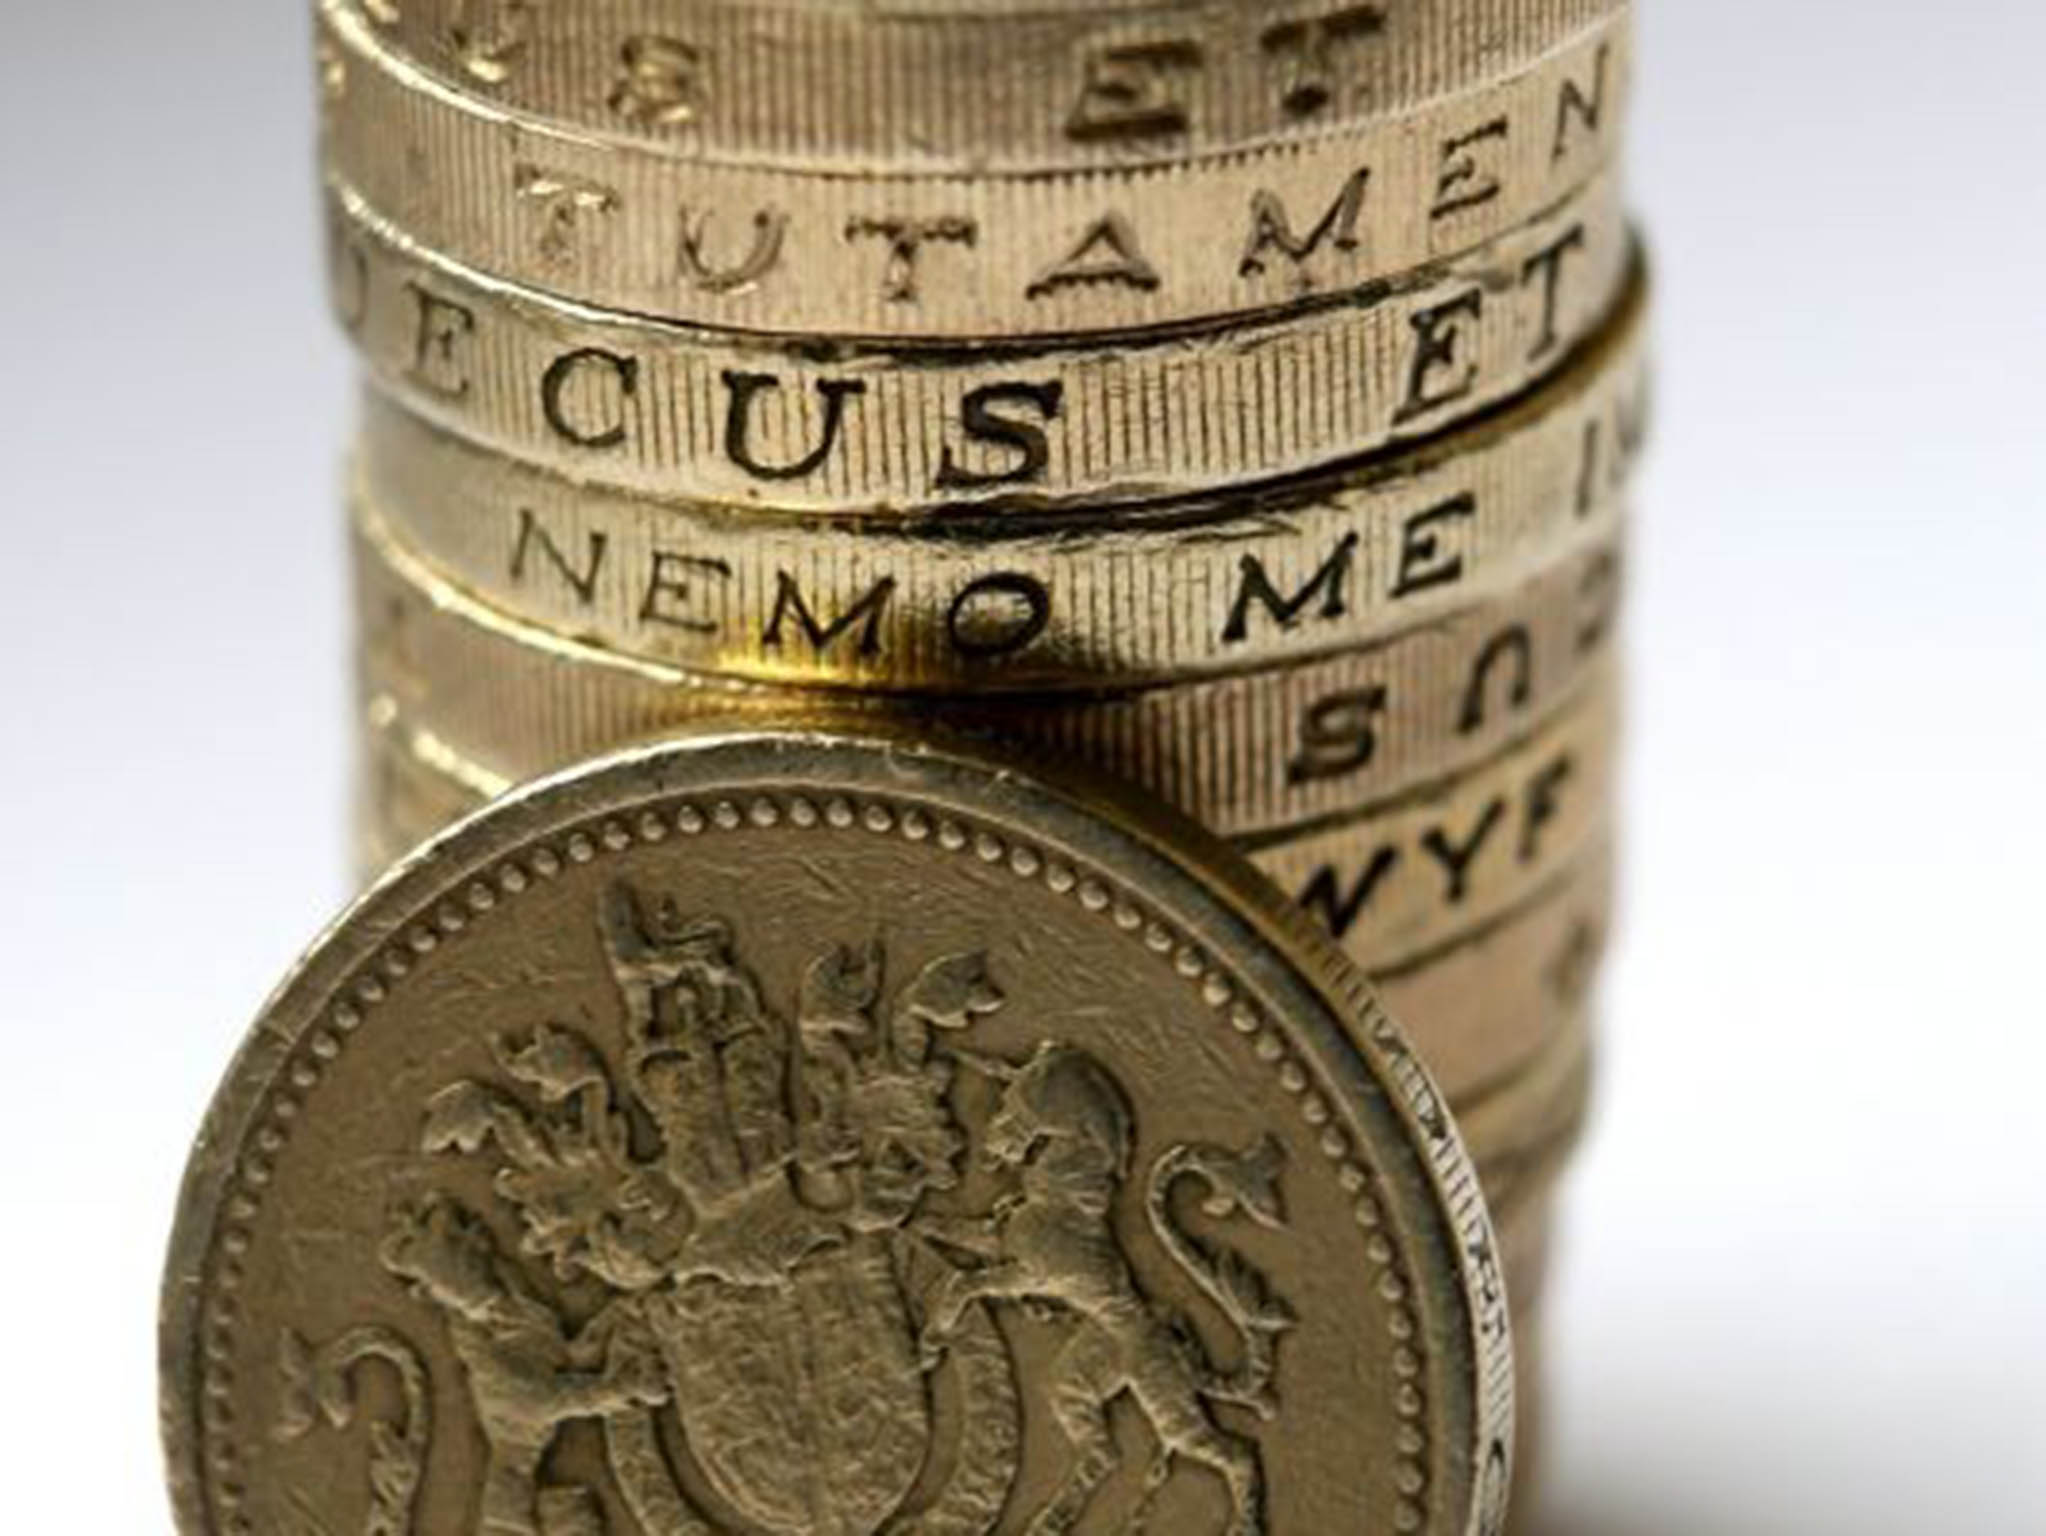 Round £1 coins will no longer be spendable from October